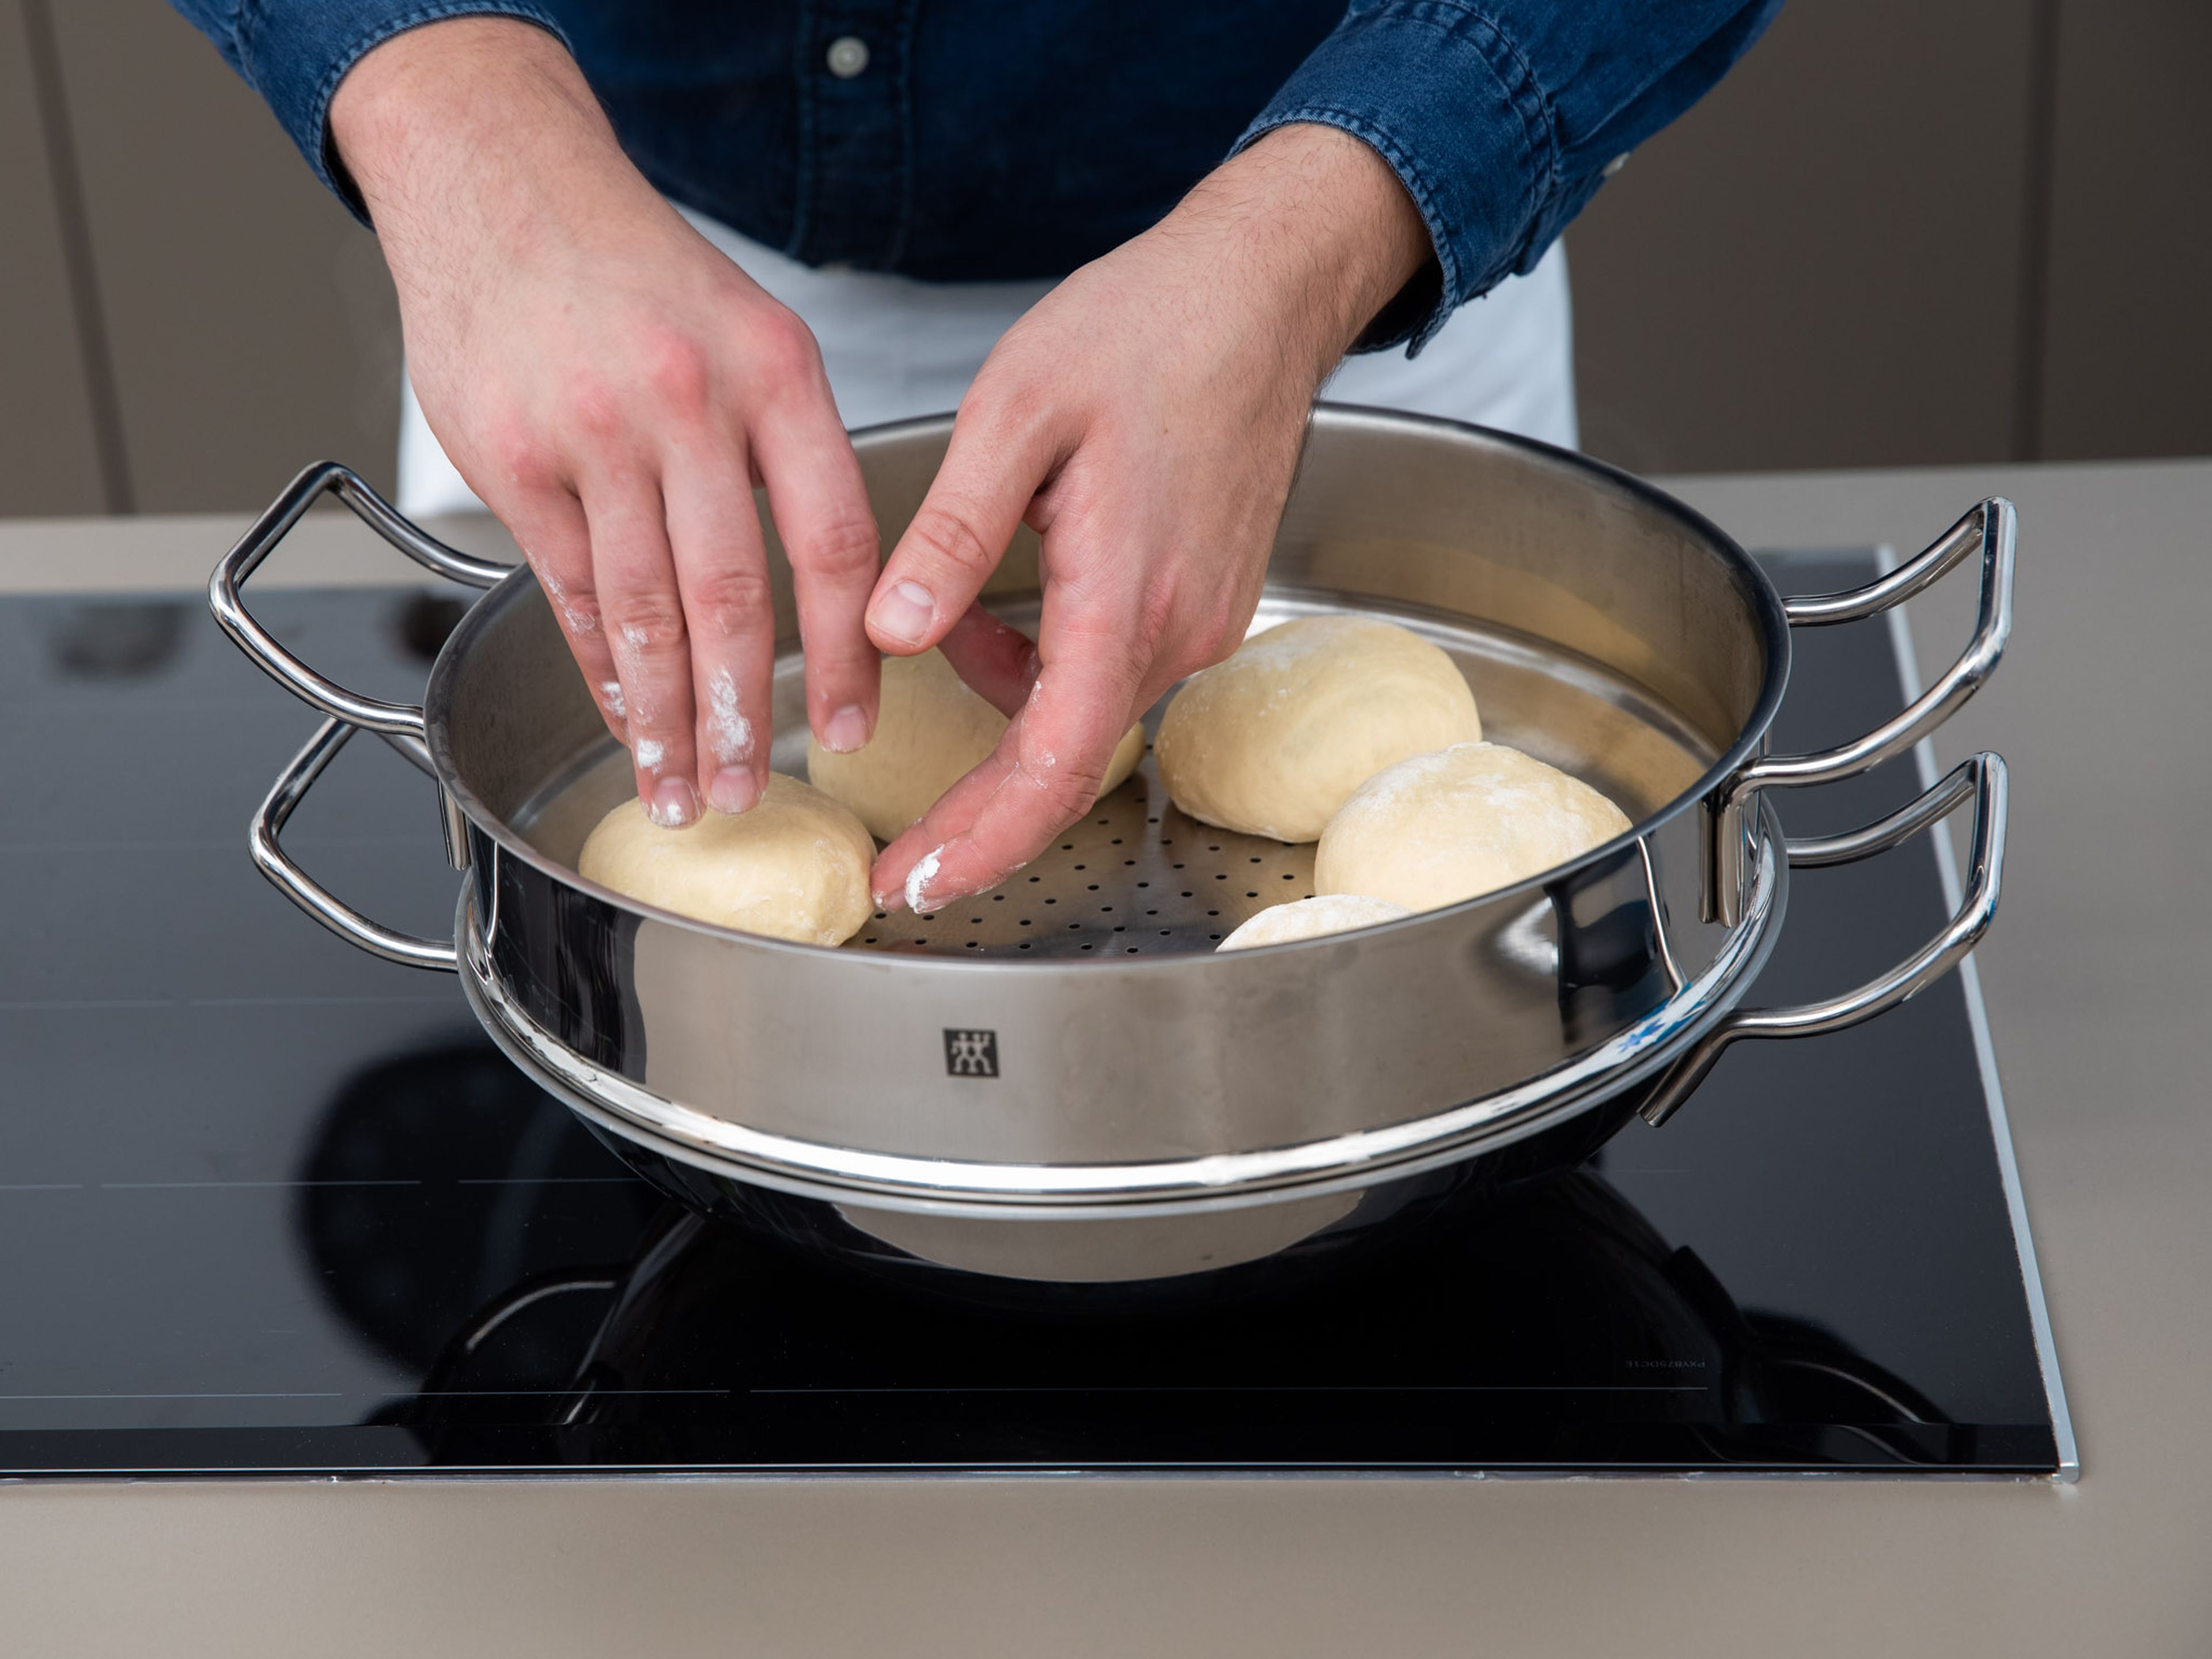 In a pot, bring water to a boil. Transfer the yeast dumplings to a sieve inside the pot, but make sure that sieve and water only touch slightly. Cover and let the dumplings steam over medium heat for approx. 12 – 15 min.